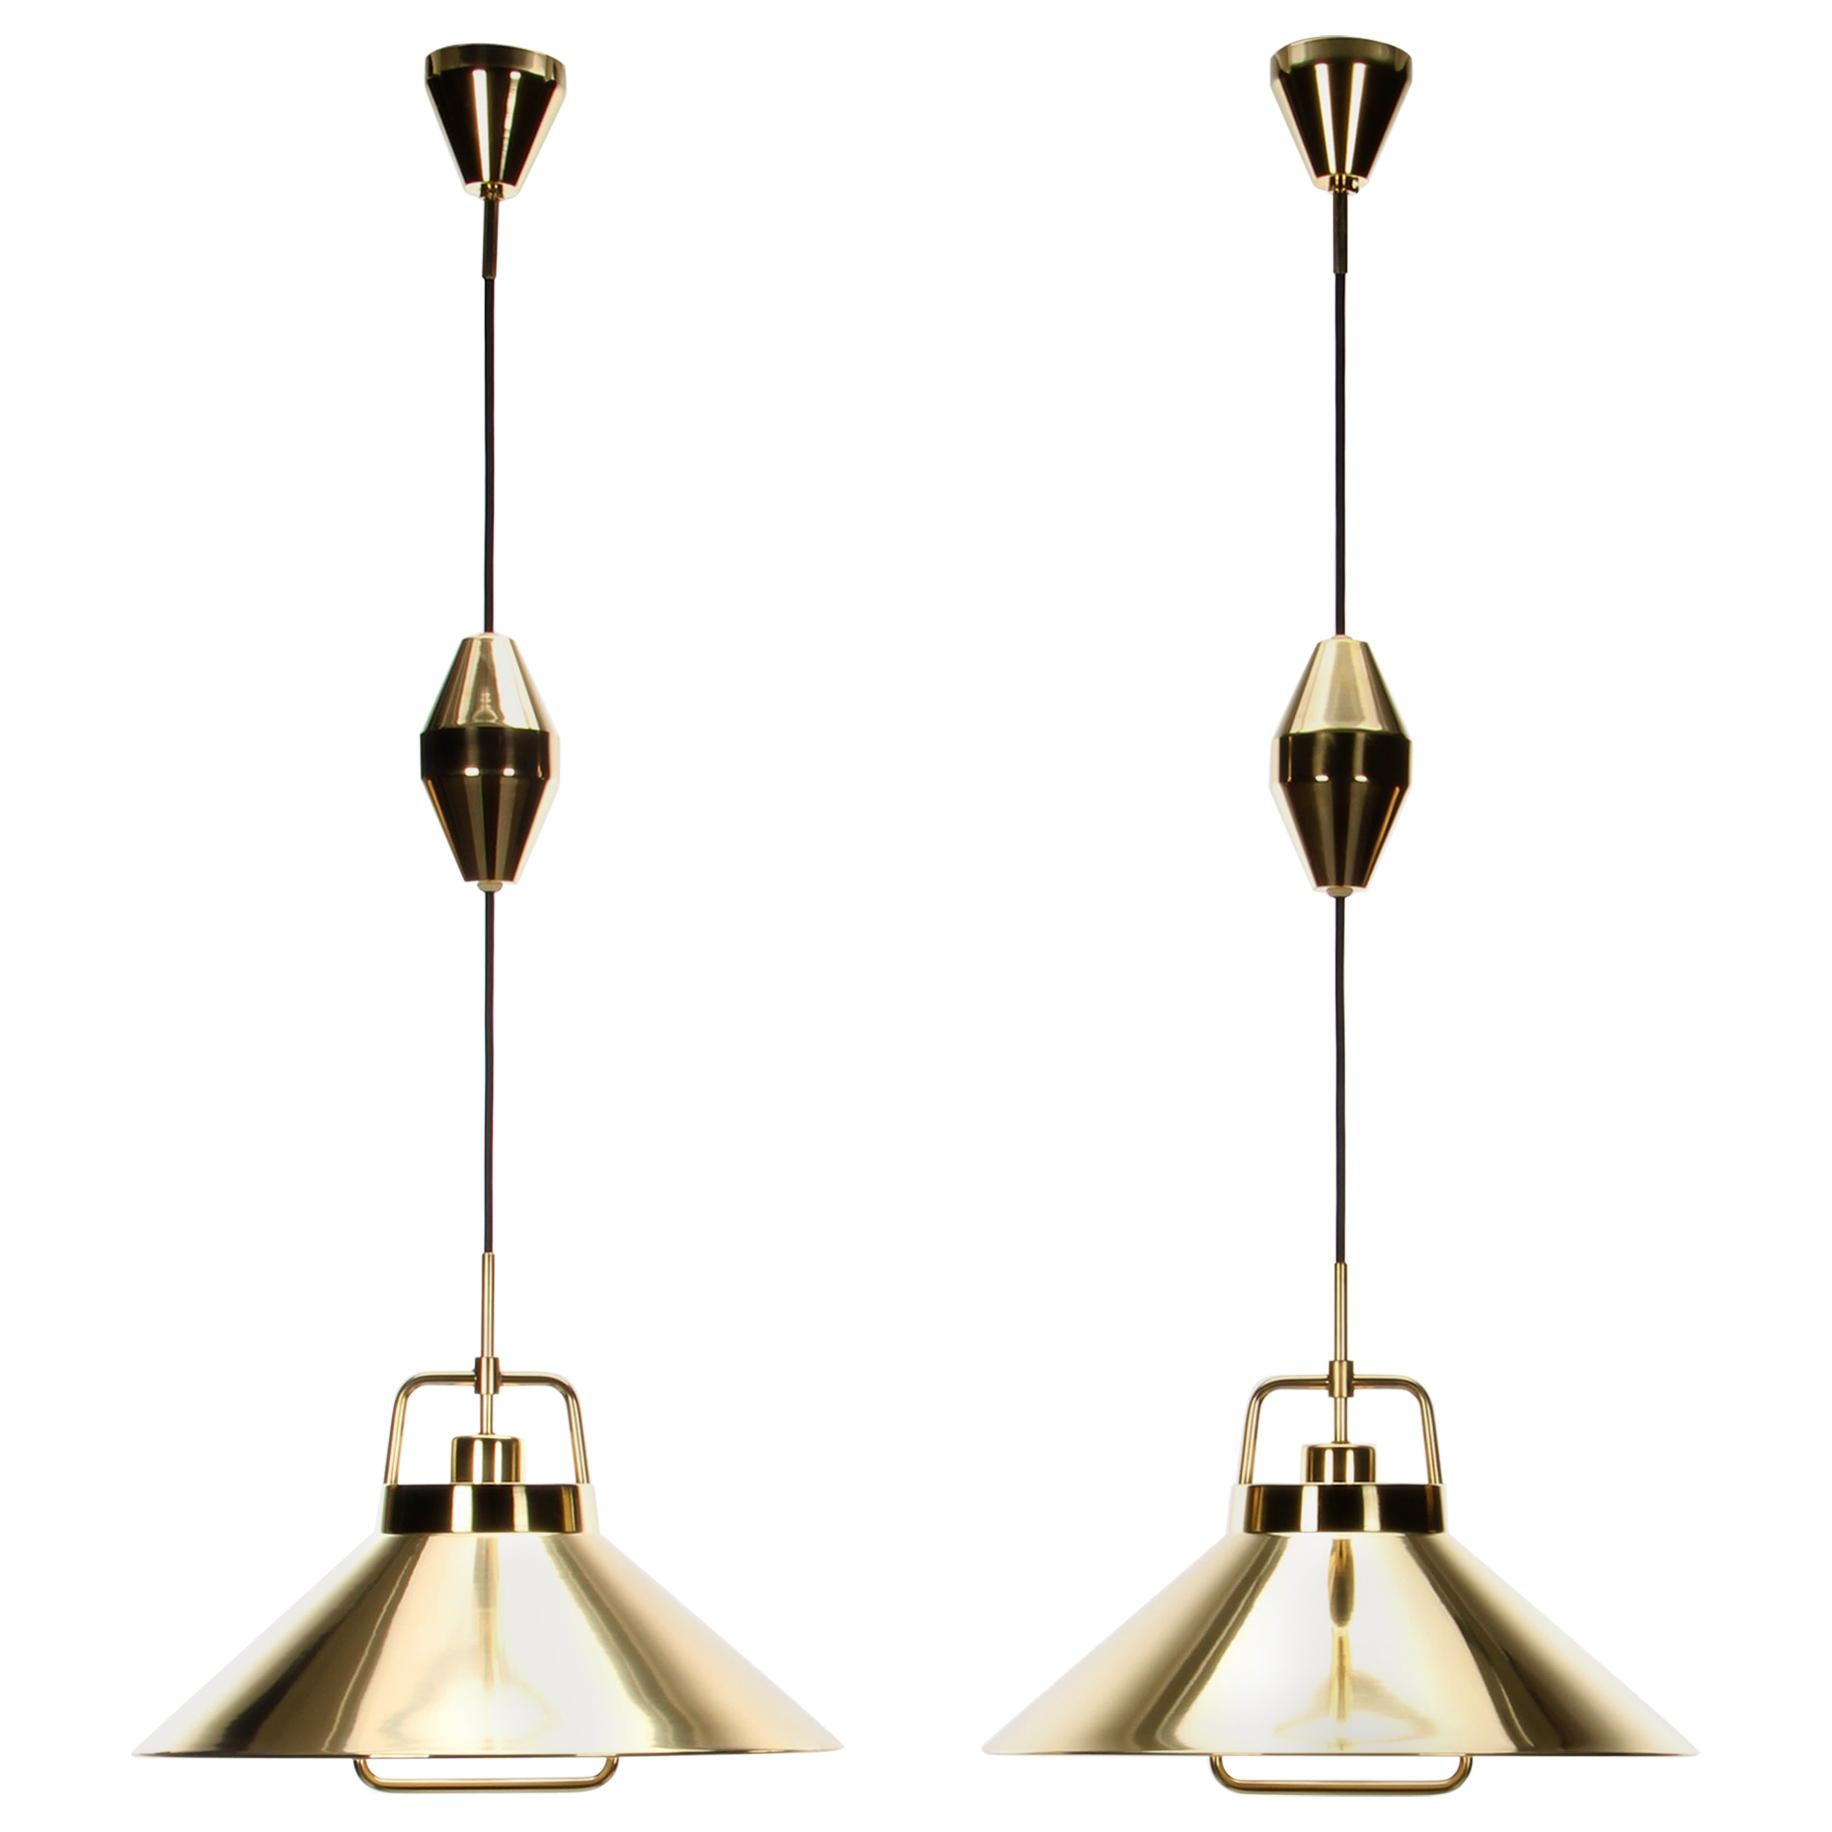 P295 Pendant Pair by Fritz Schlegel in 1938 for Lyfa with Brass Suspensions